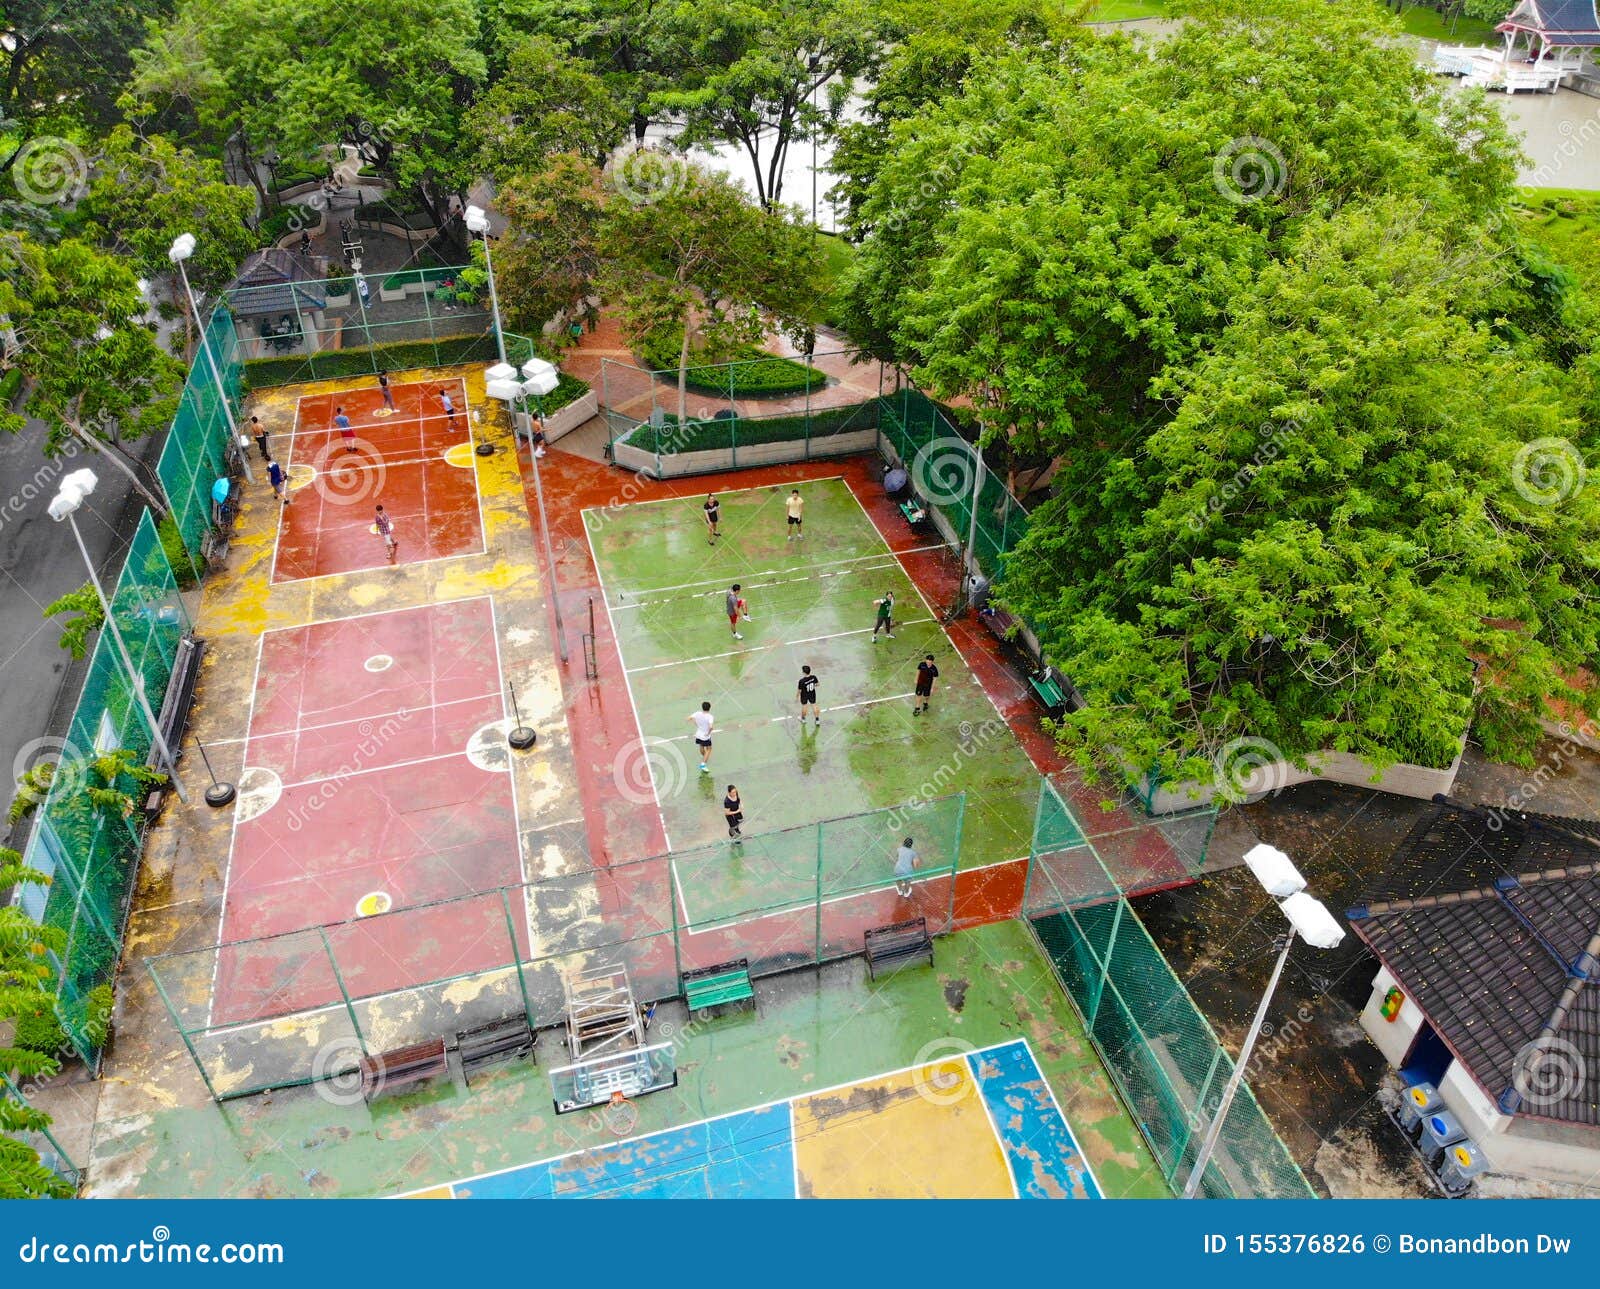 Aerial View of Basketball Court with Players in Public Park in Bangkok